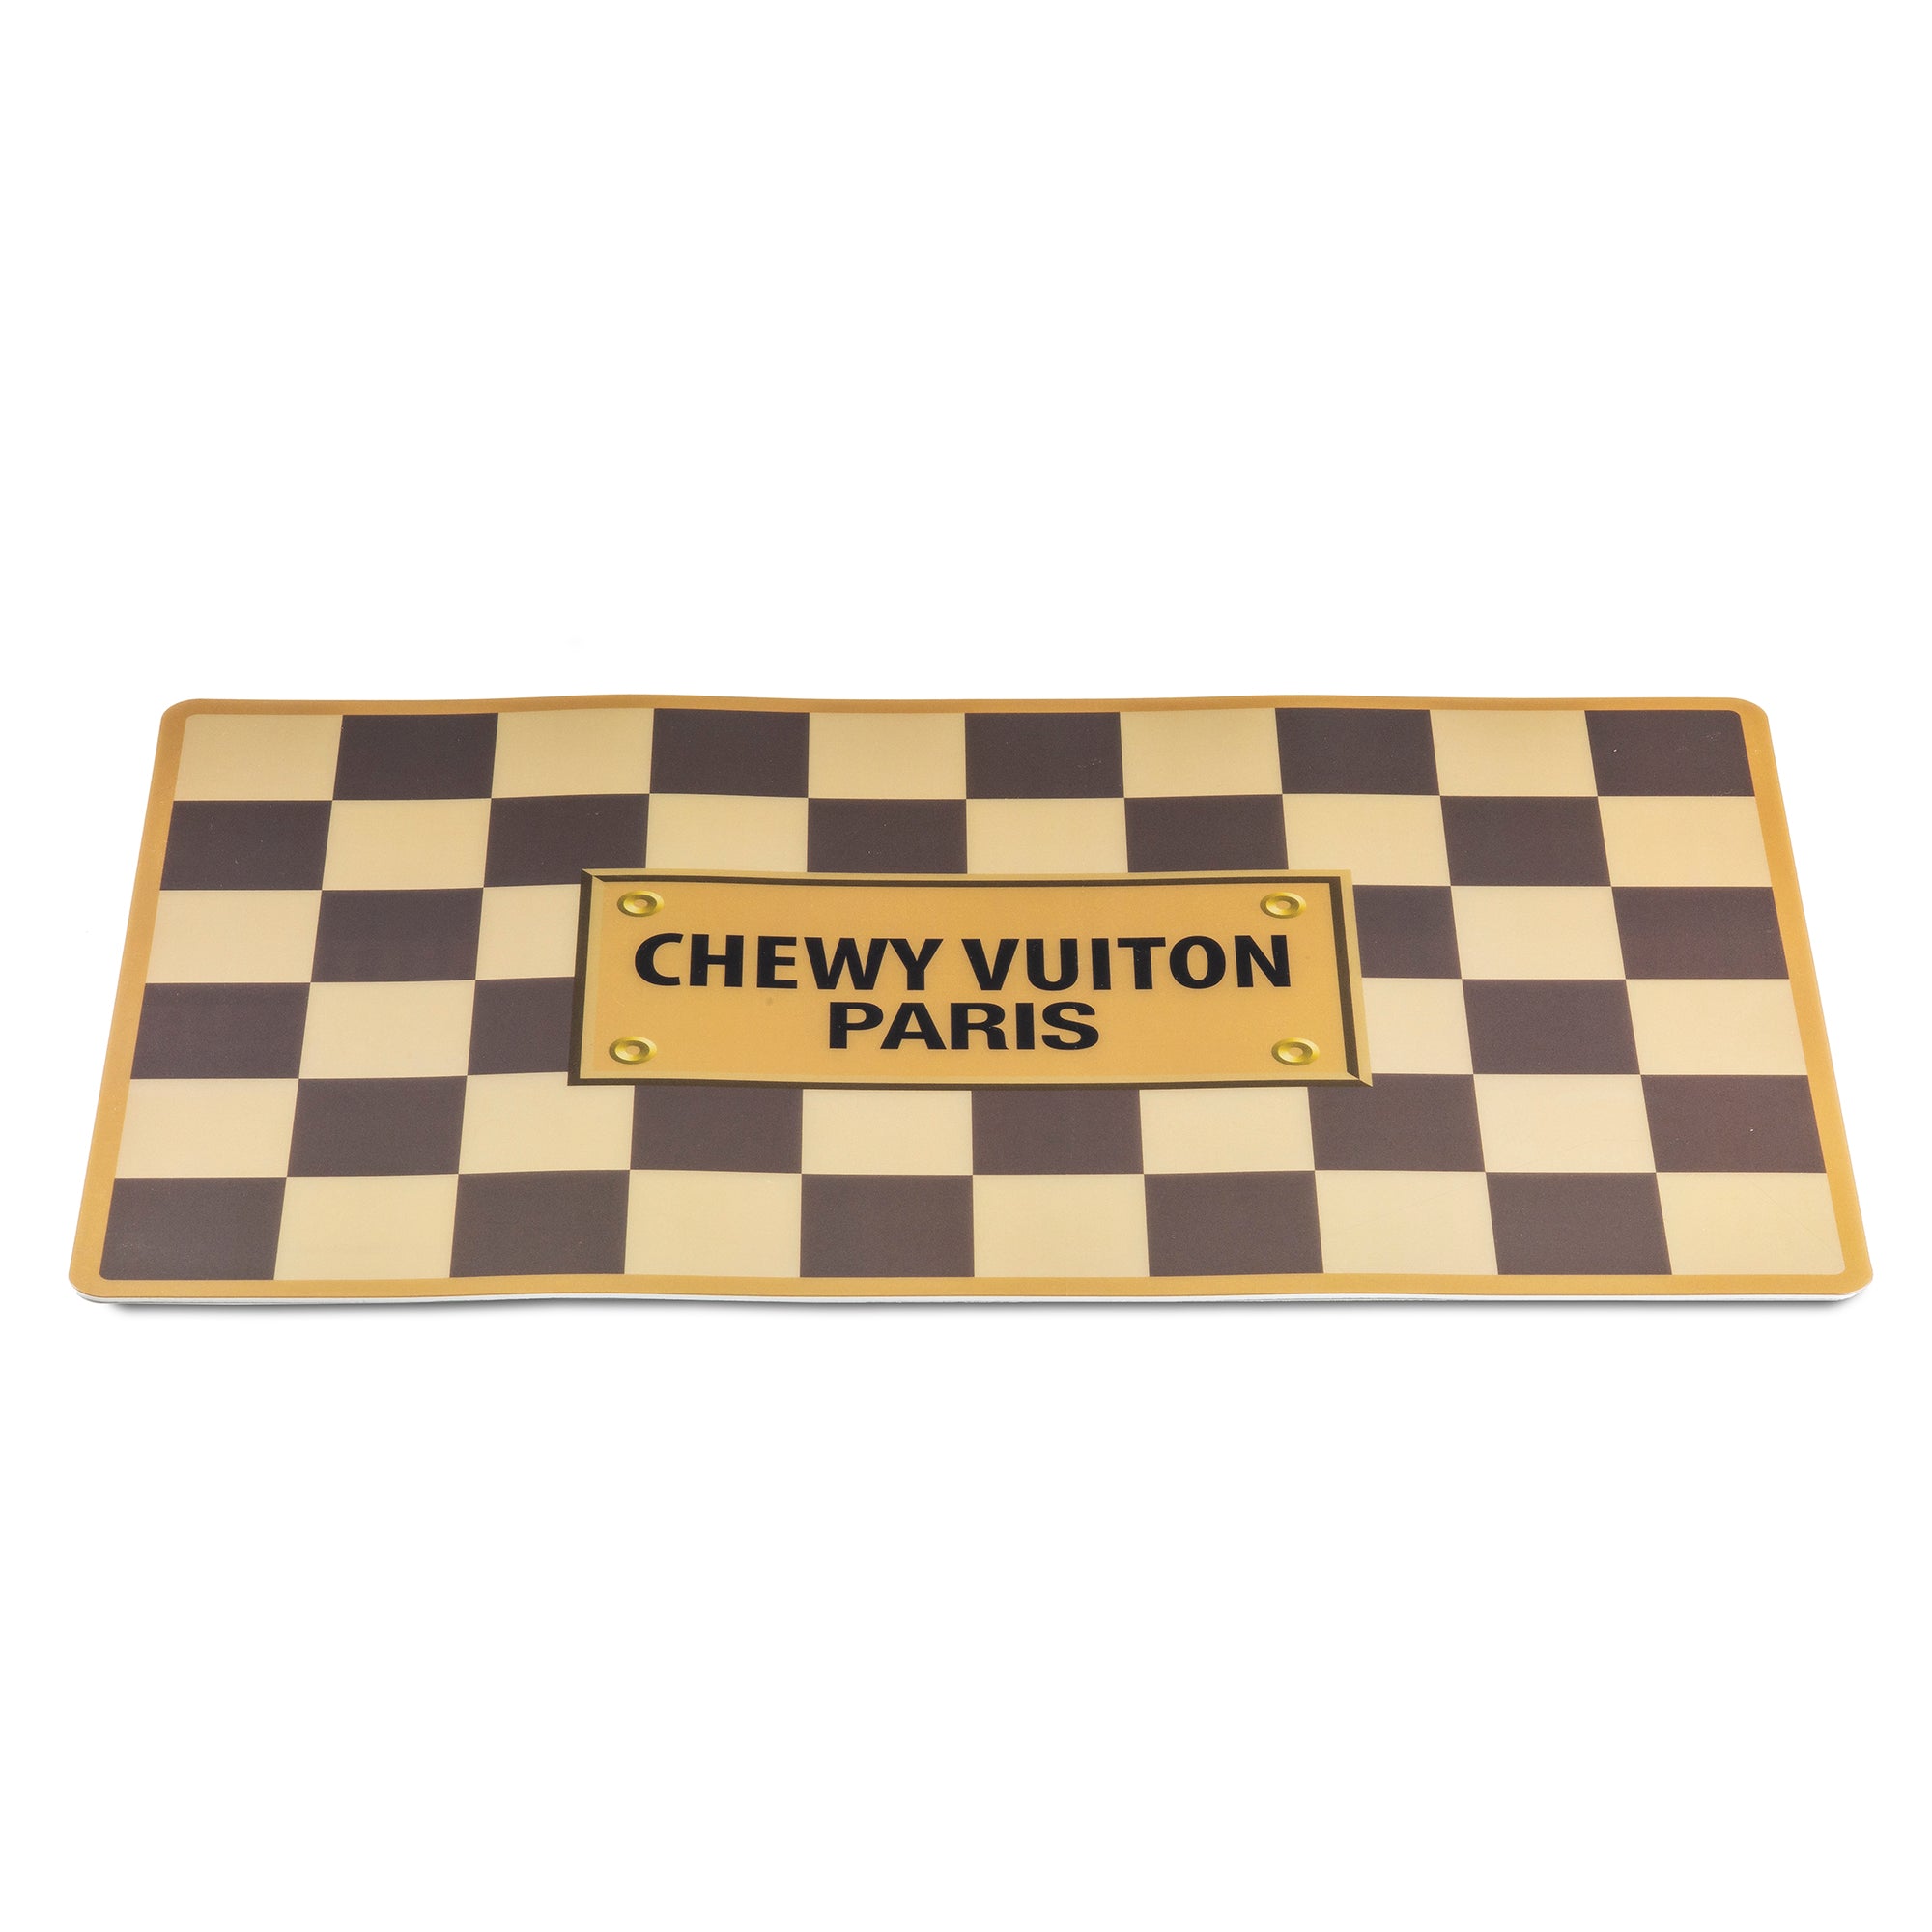 Designer-Inspired Fluff: Parody Chewy Vuiton Plush Dog Placemats